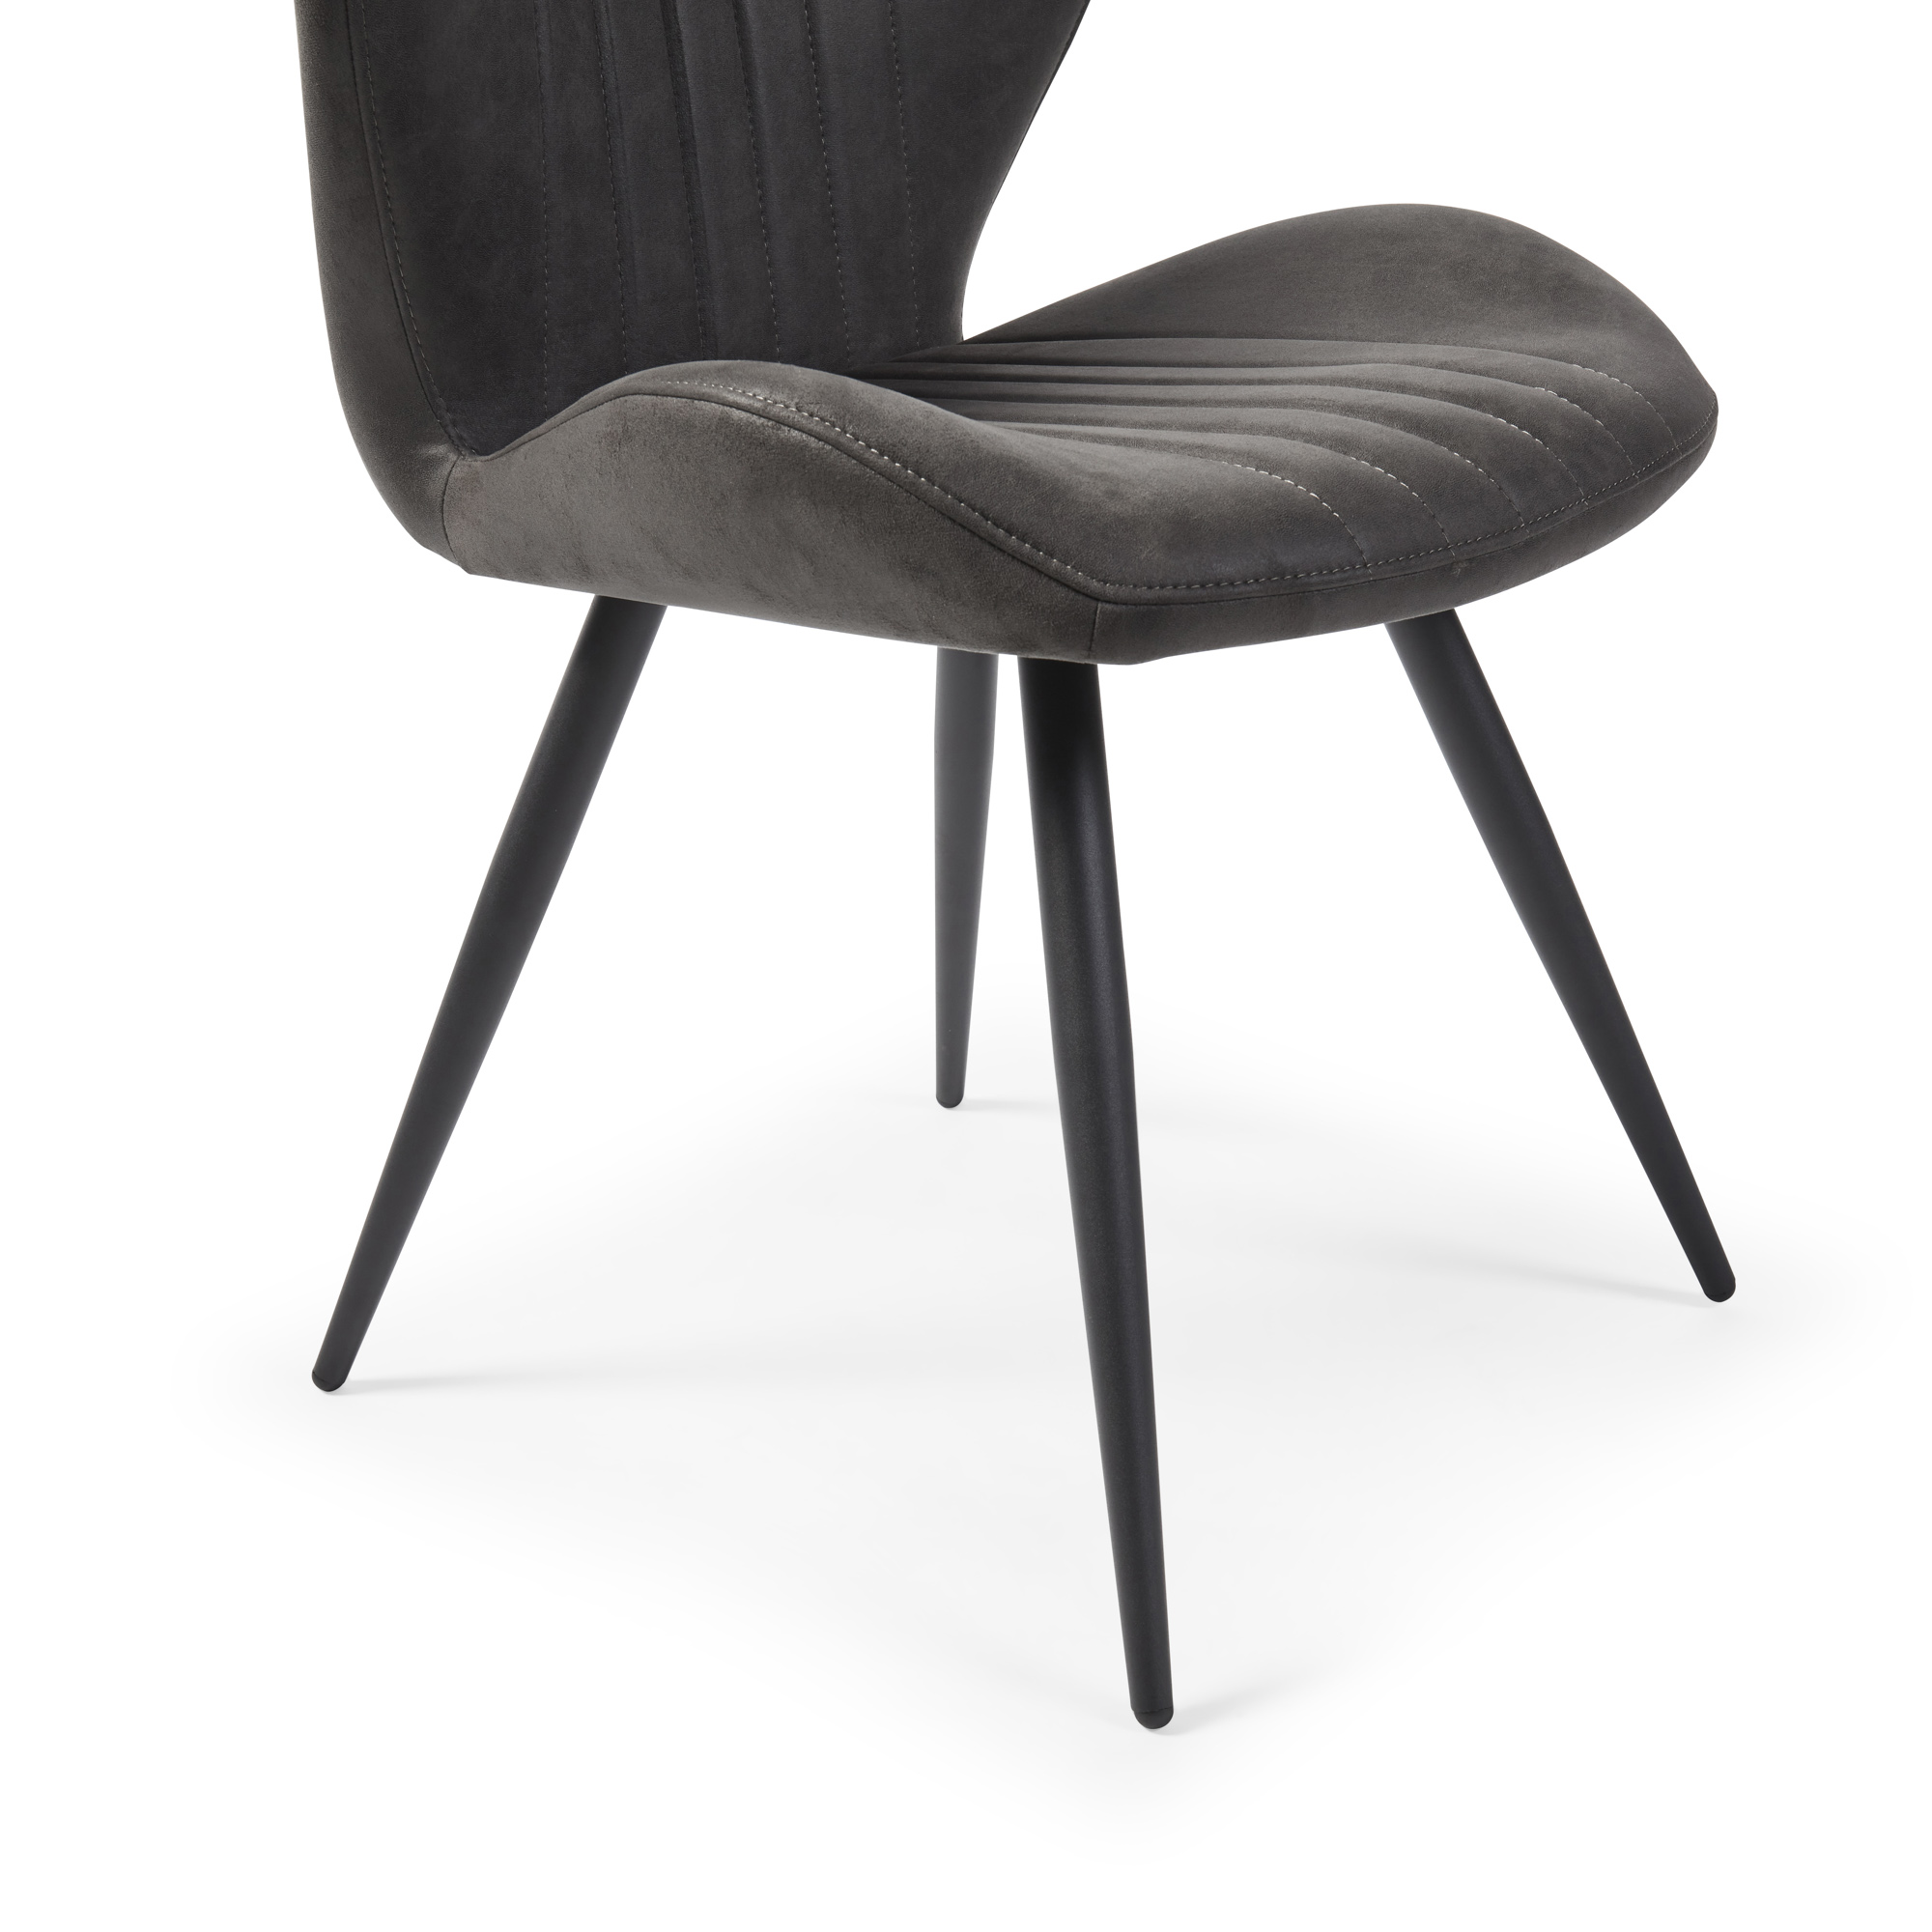 Watson Grey Nubuck Upholstered Dining Chair with Black Legs